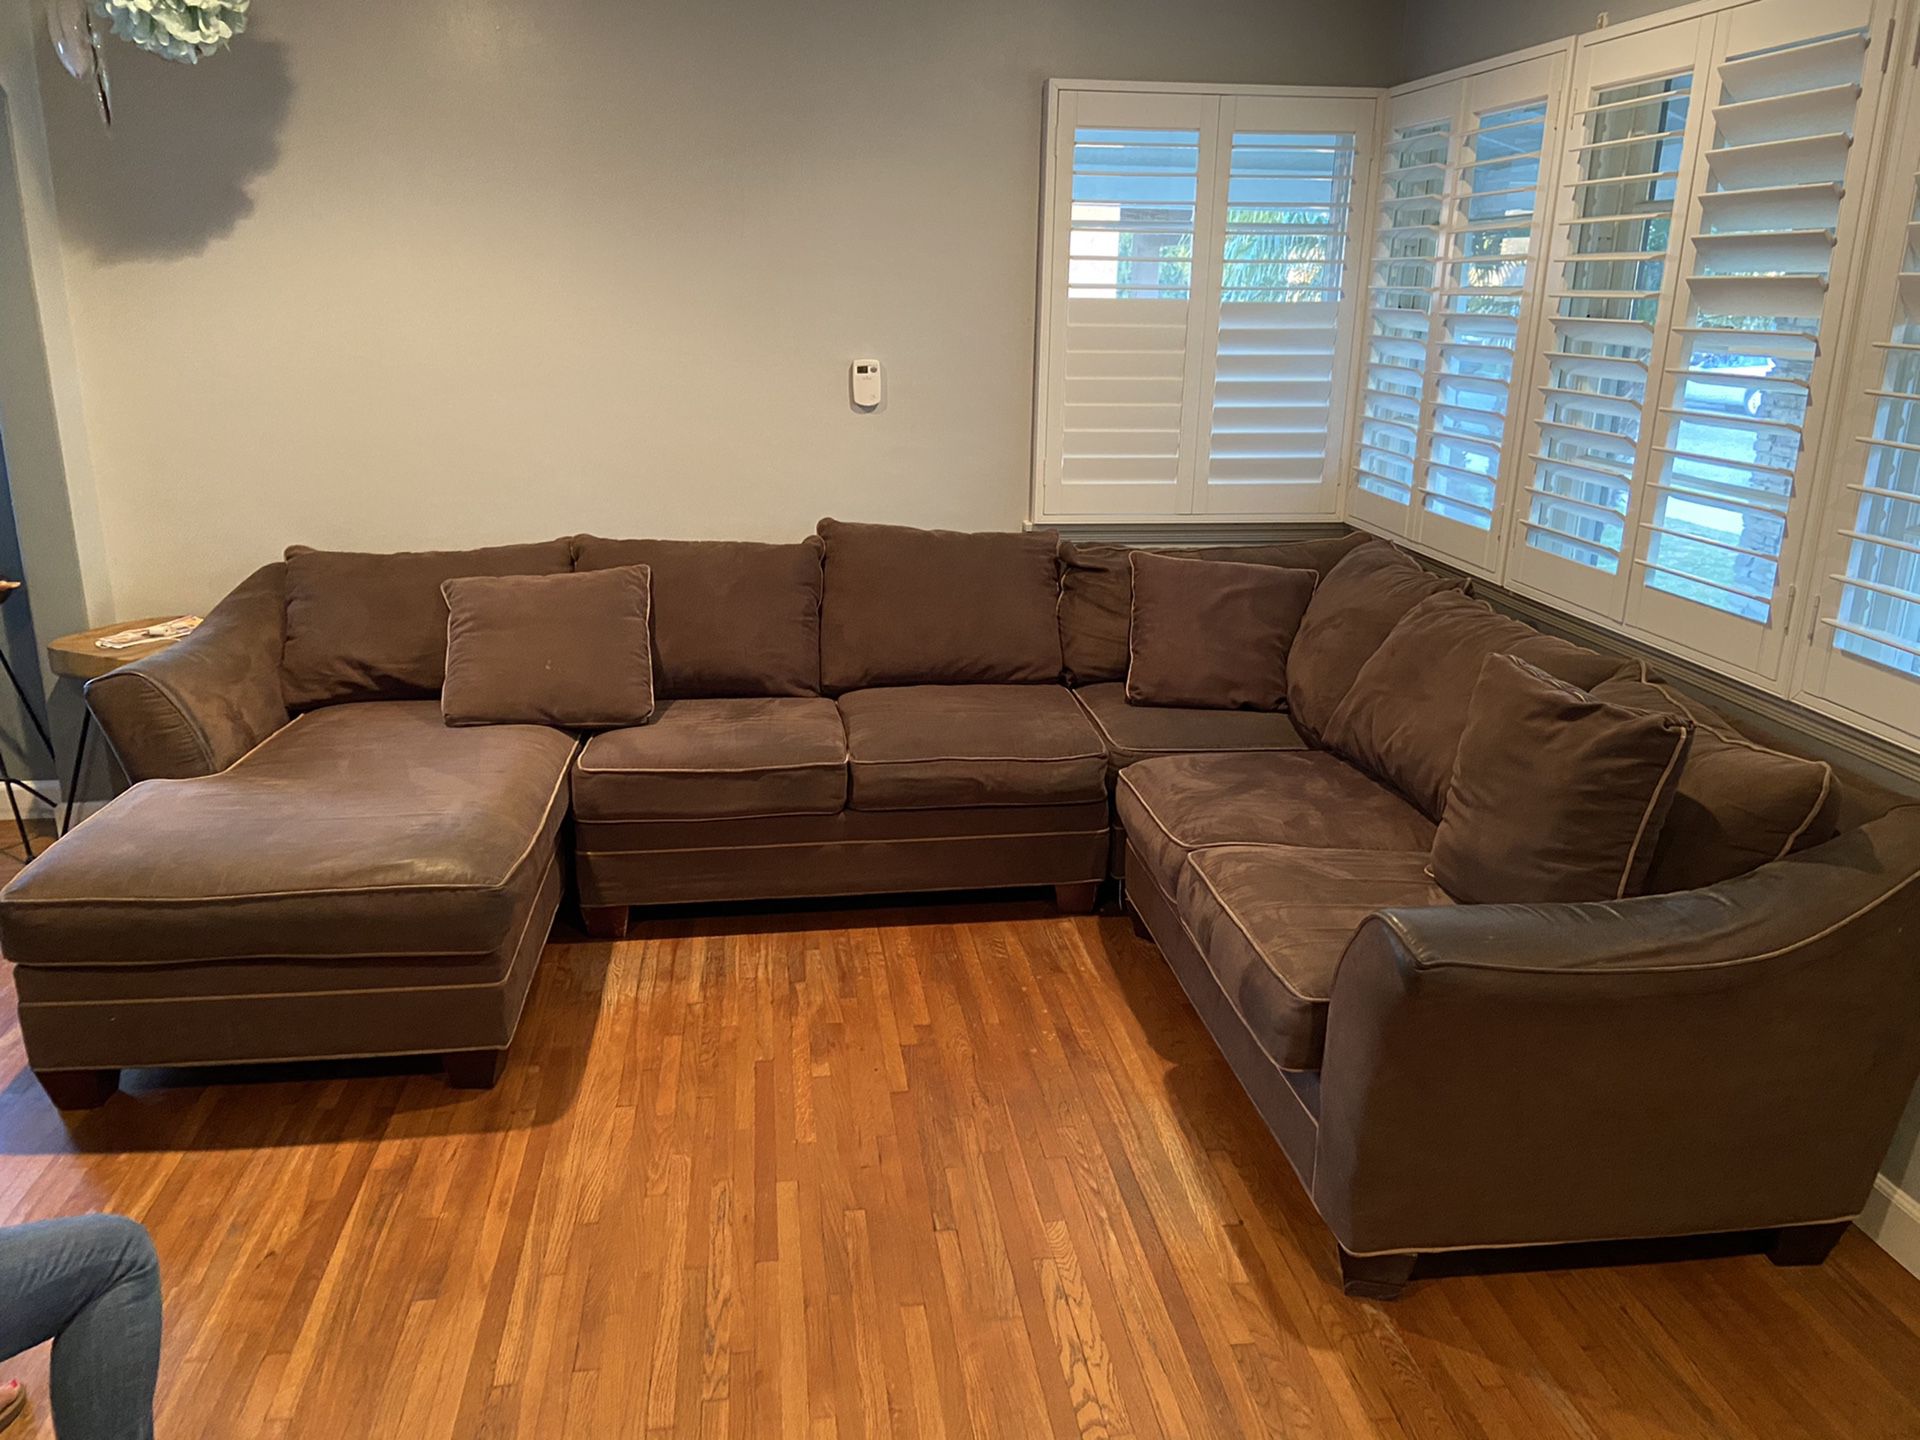 Modular/sectional couch